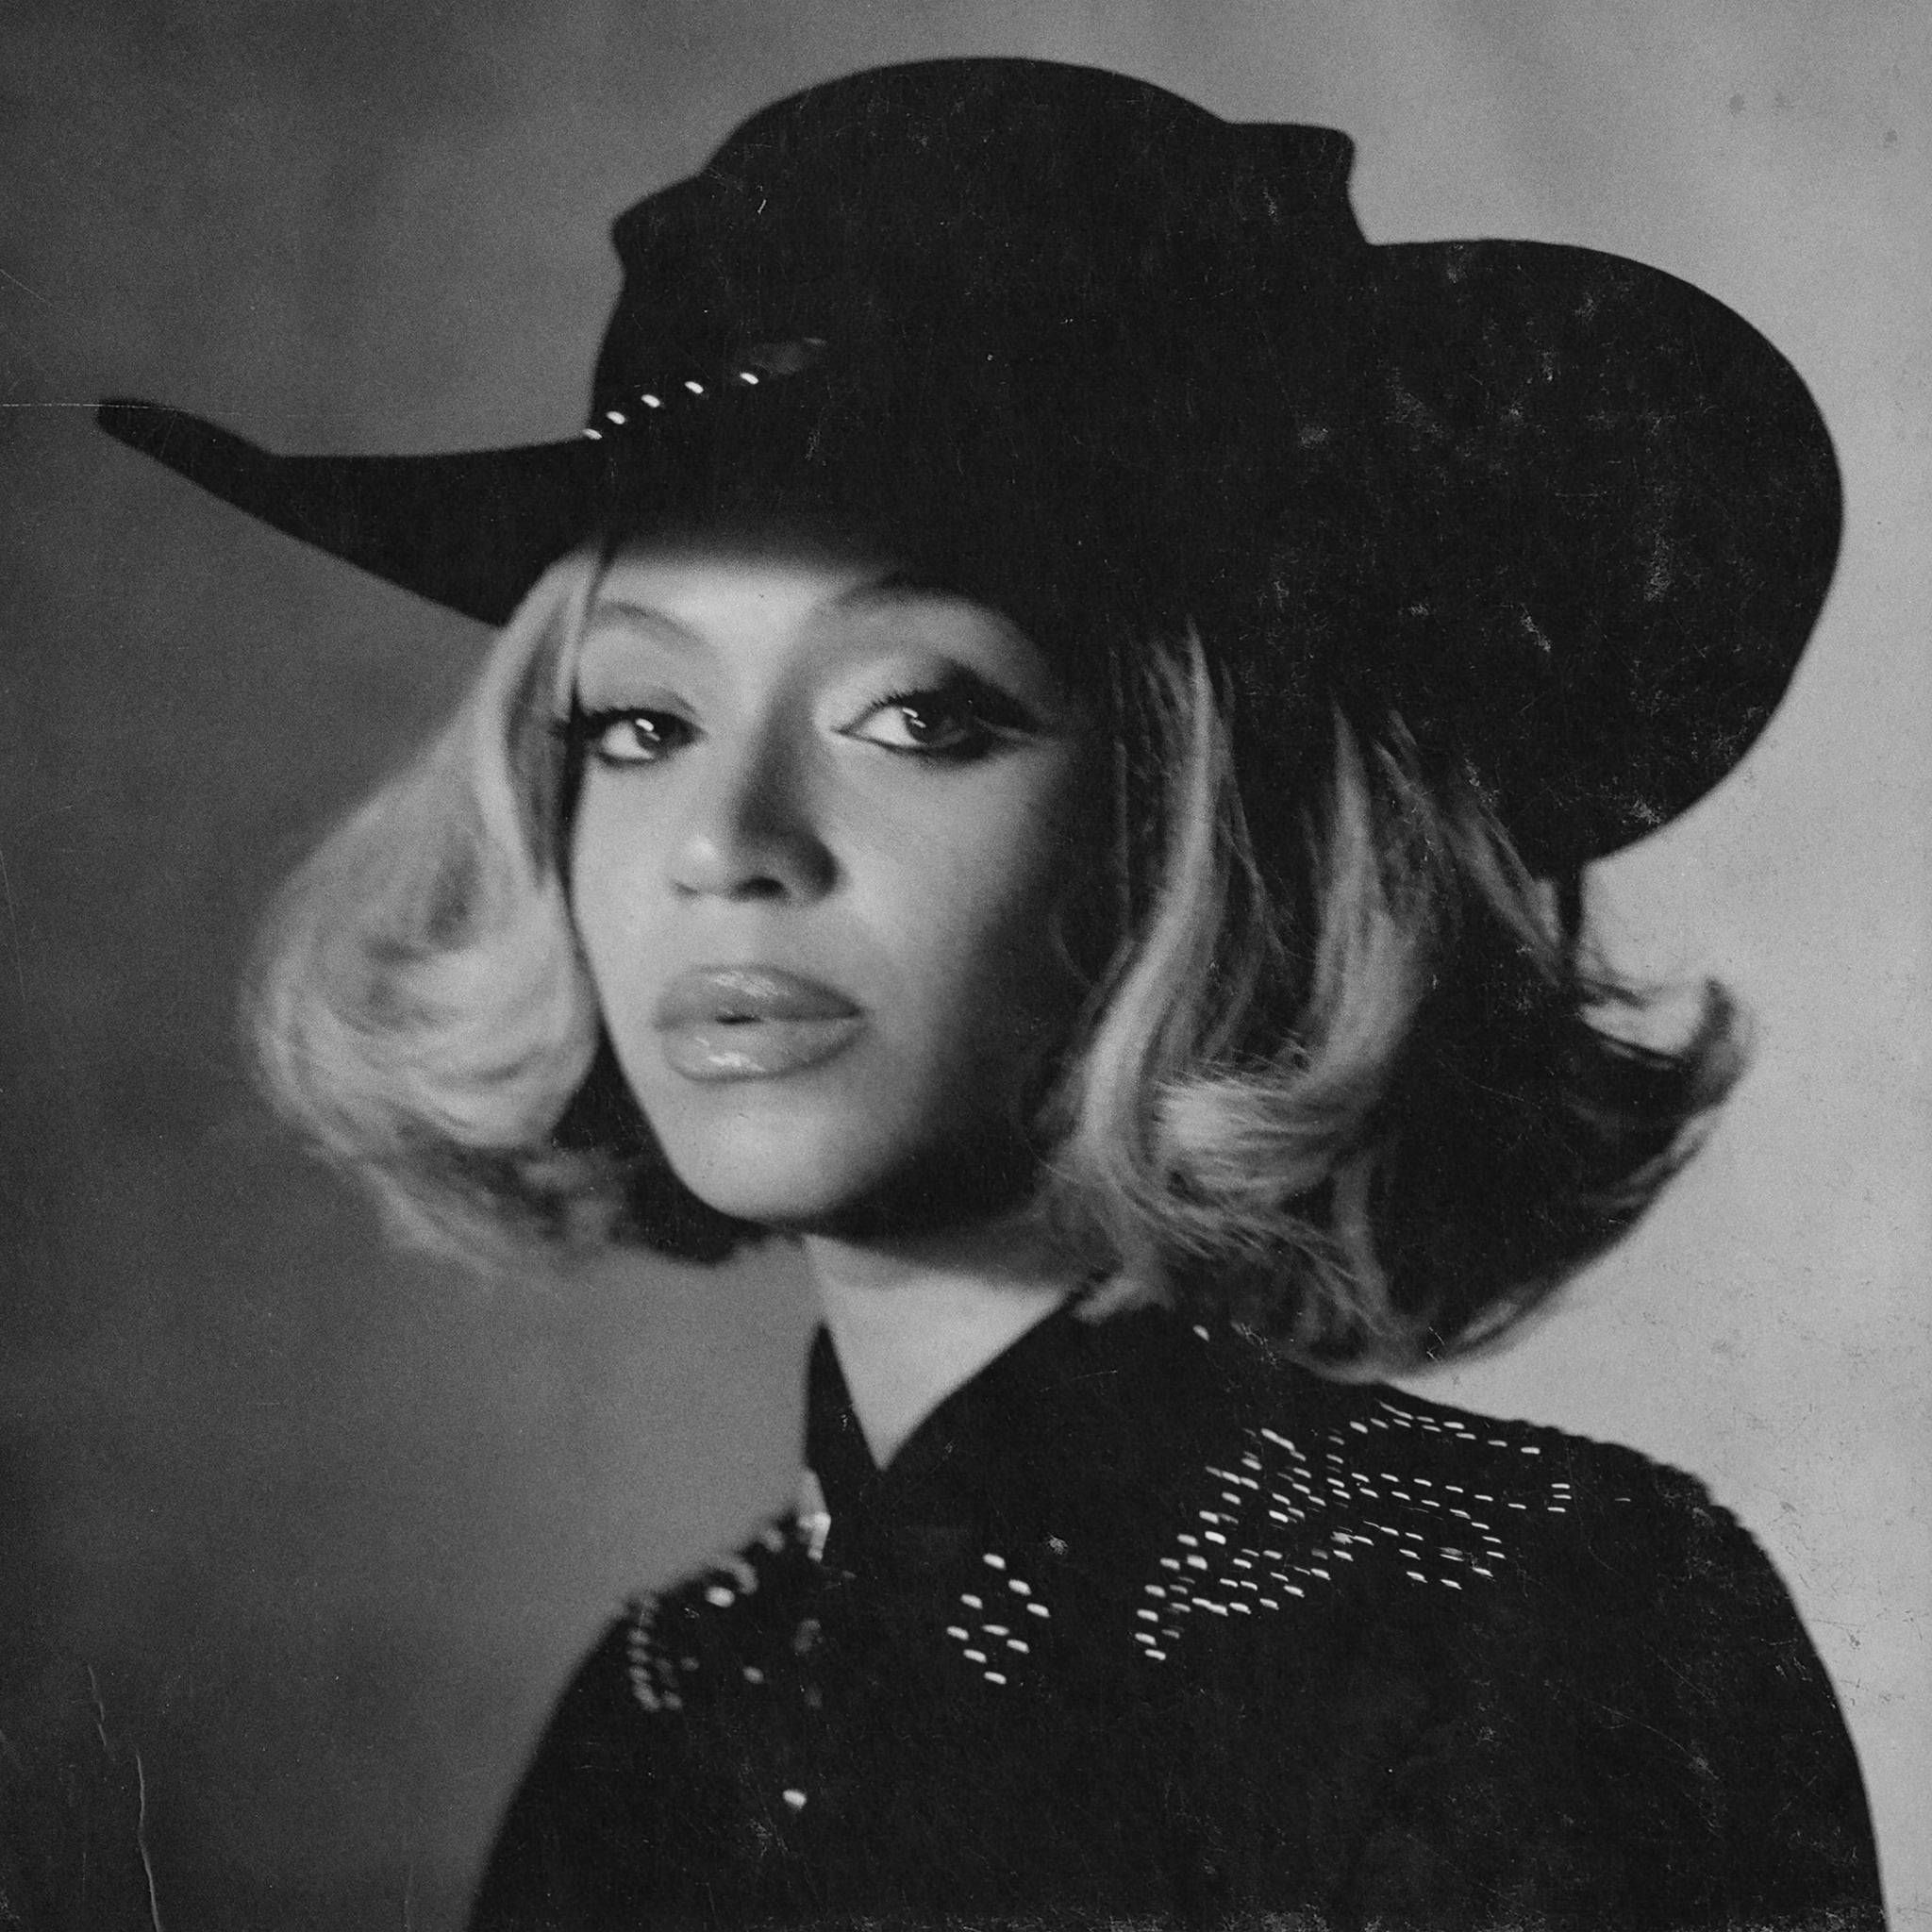 Dolly Parton expressed her support for Beyoncé after the singer earned a #1 country hit with "Texas Hold 'Em"